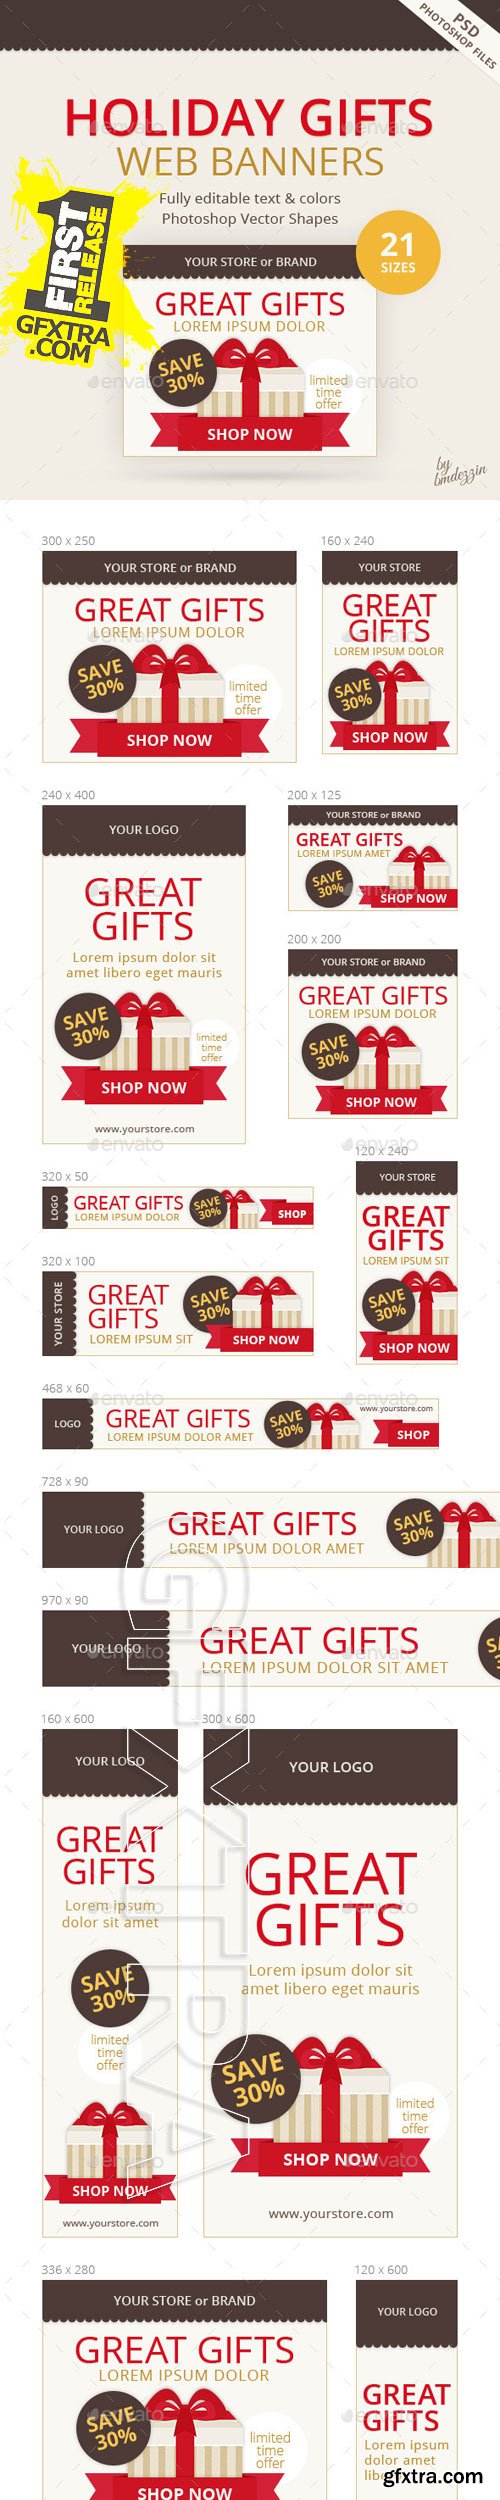 GraphicRiver - Holiday Gifts Web Banners 9512338